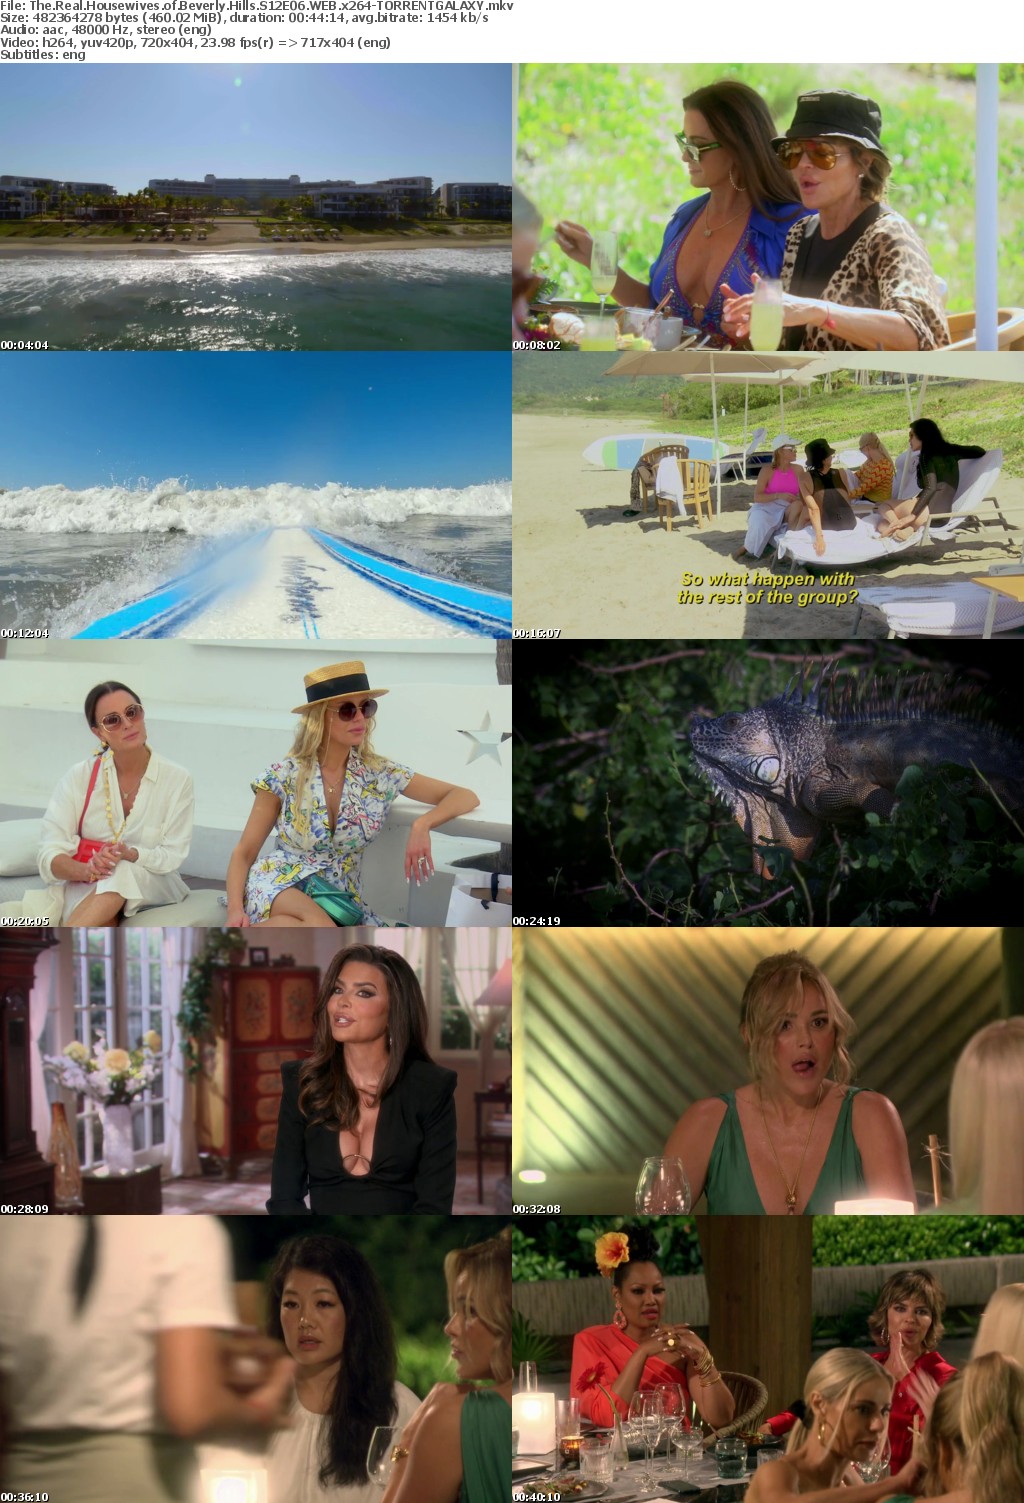 The Real Housewives of Beverly Hills S12E06 WEB x264-GALAXY